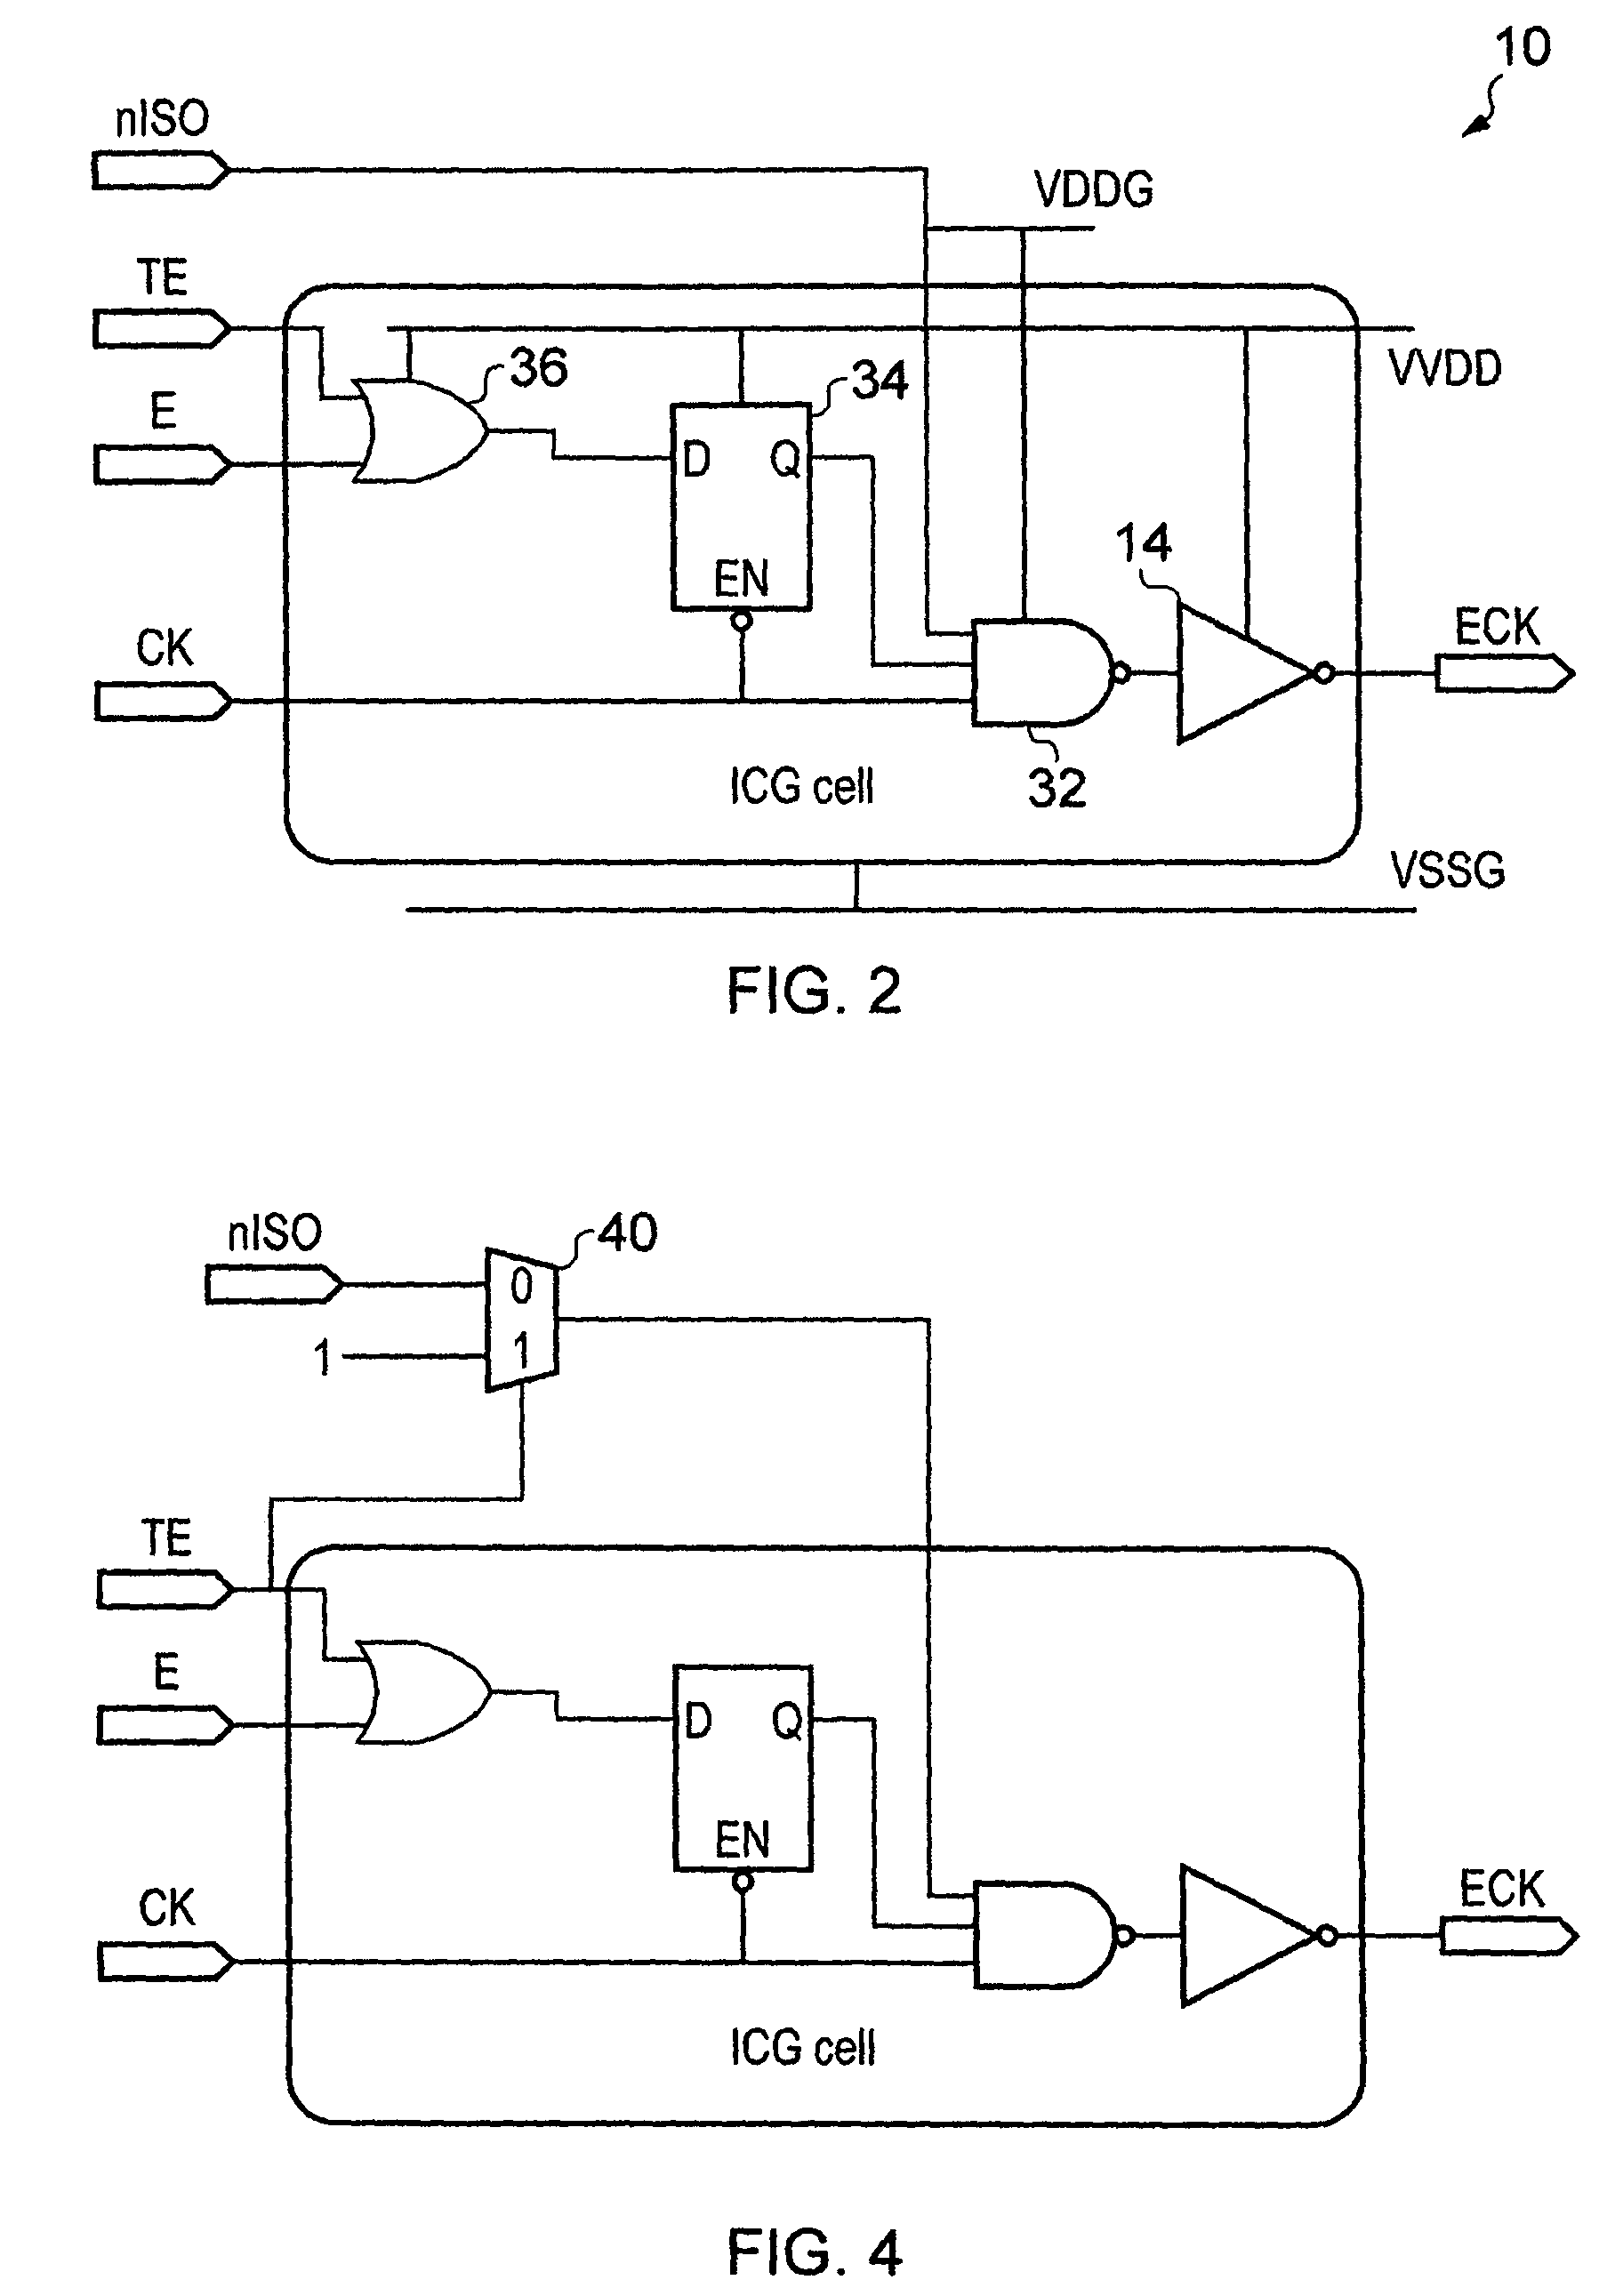 Supplying a clock signal and a gated clock signal to synchronous elements